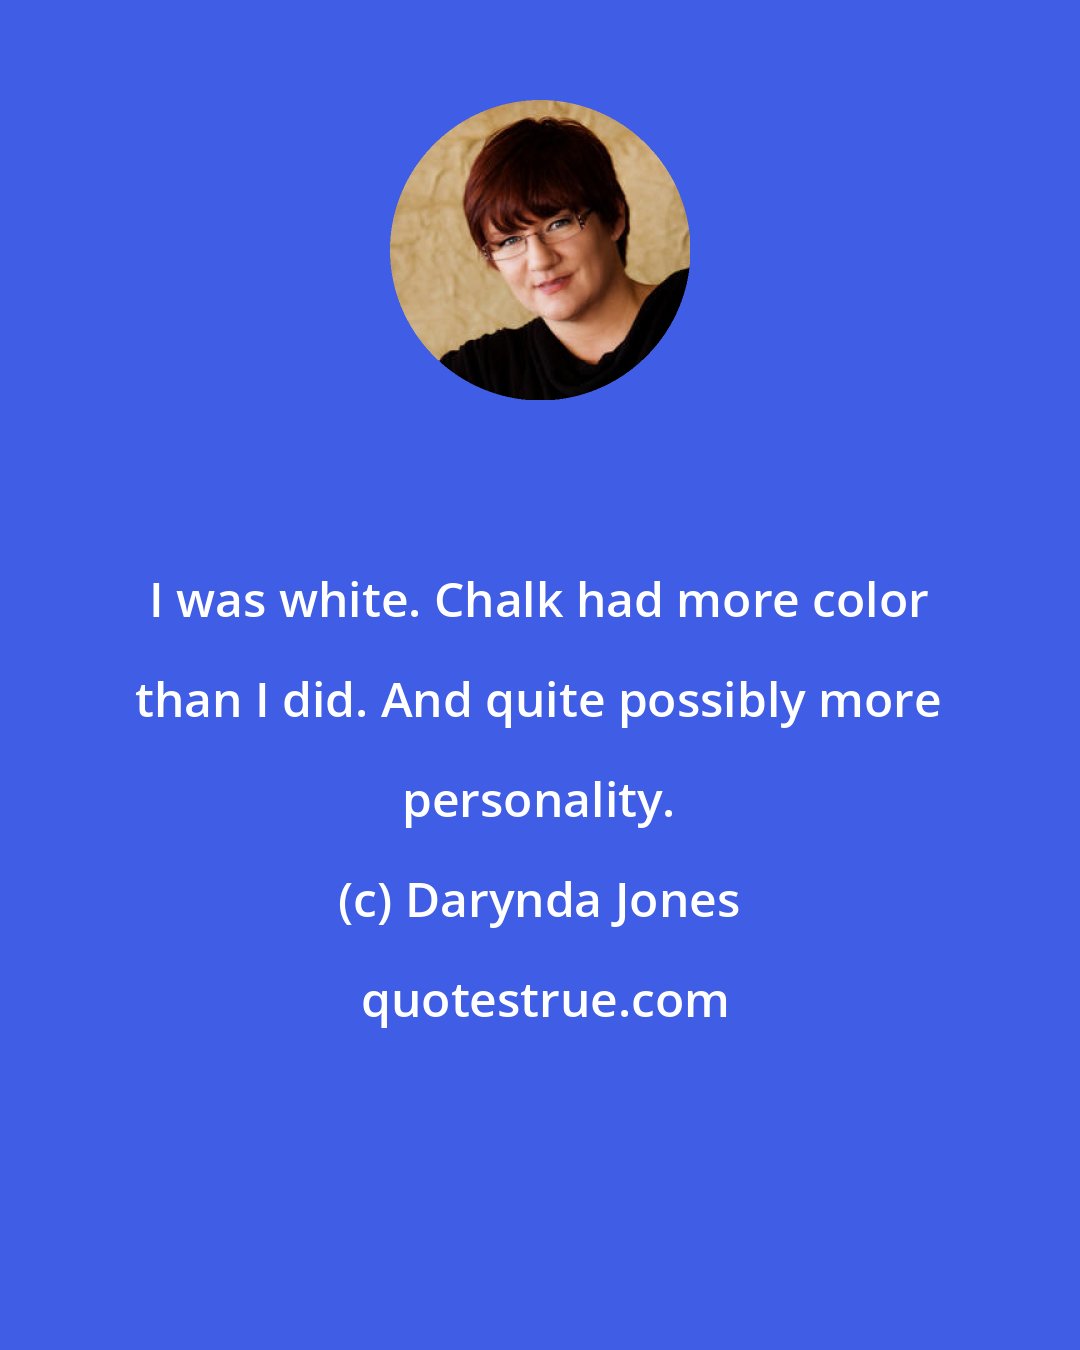 Darynda Jones: I was white. Chalk had more color than I did. And quite possibly more personality.